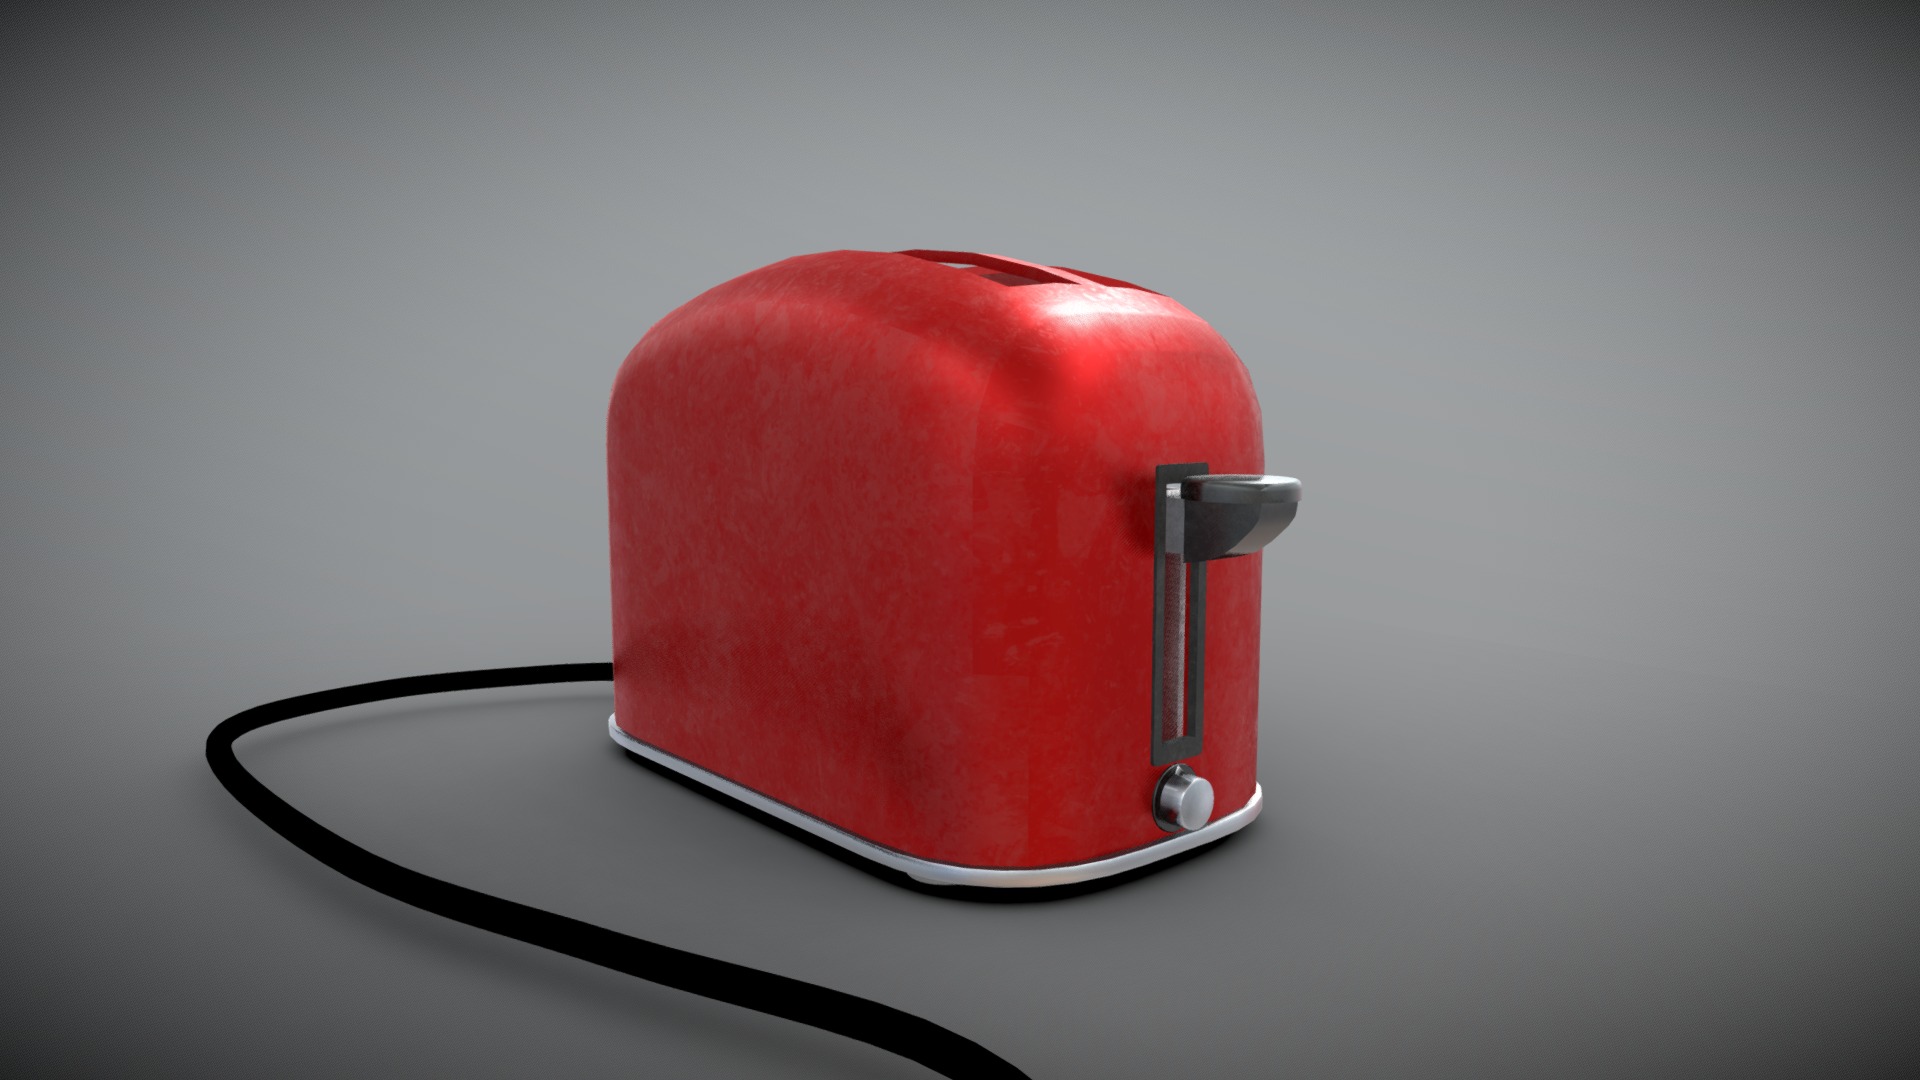 3D model Toaster - This is a 3D model of the Toaster. The 3D model is about a red ball on a white surface.